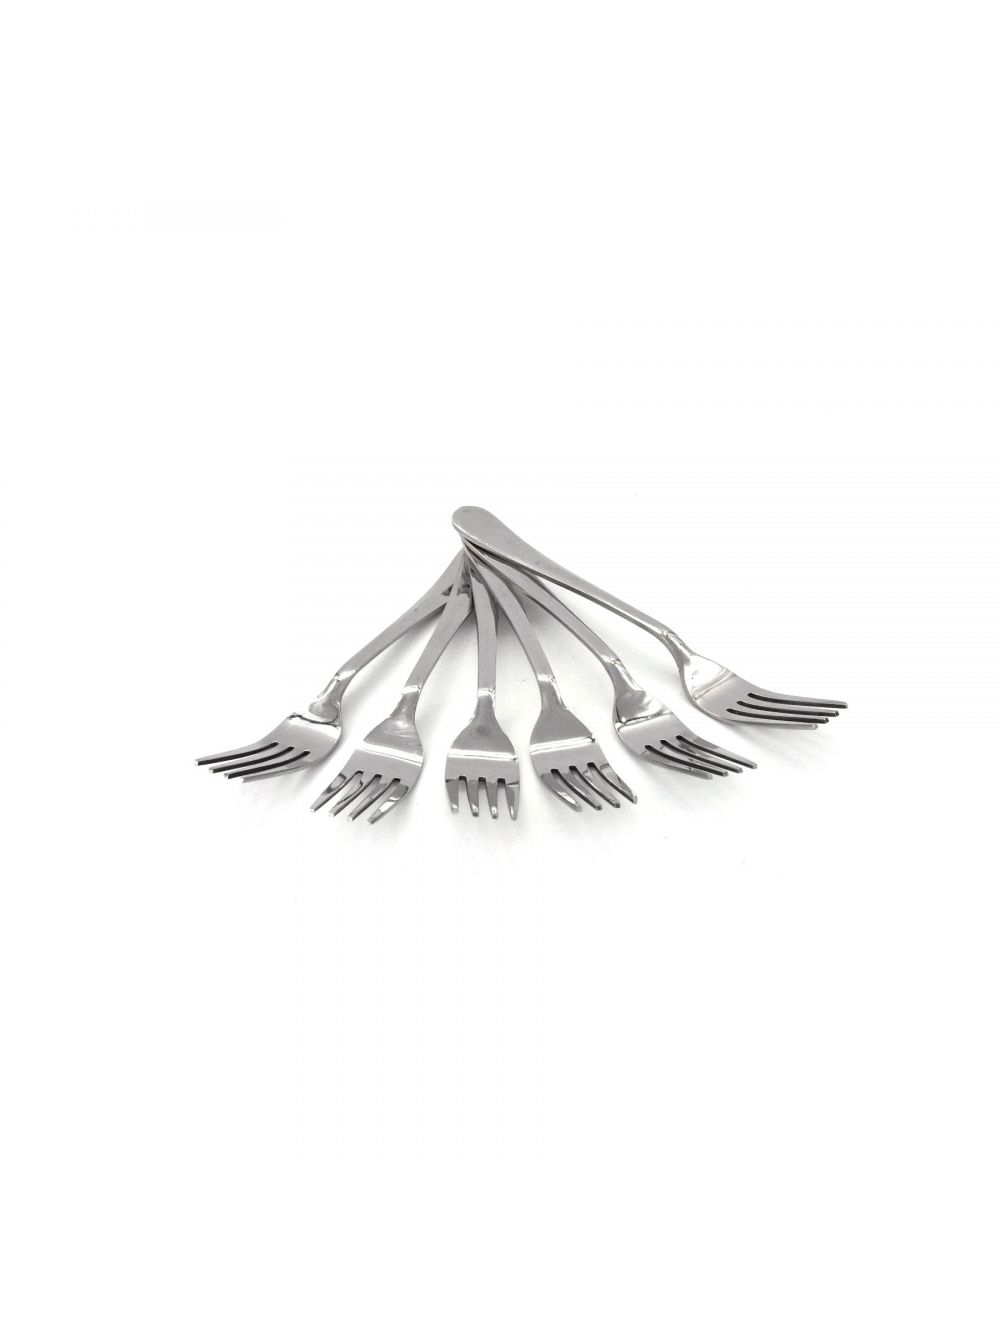 6 Piece Table Fork